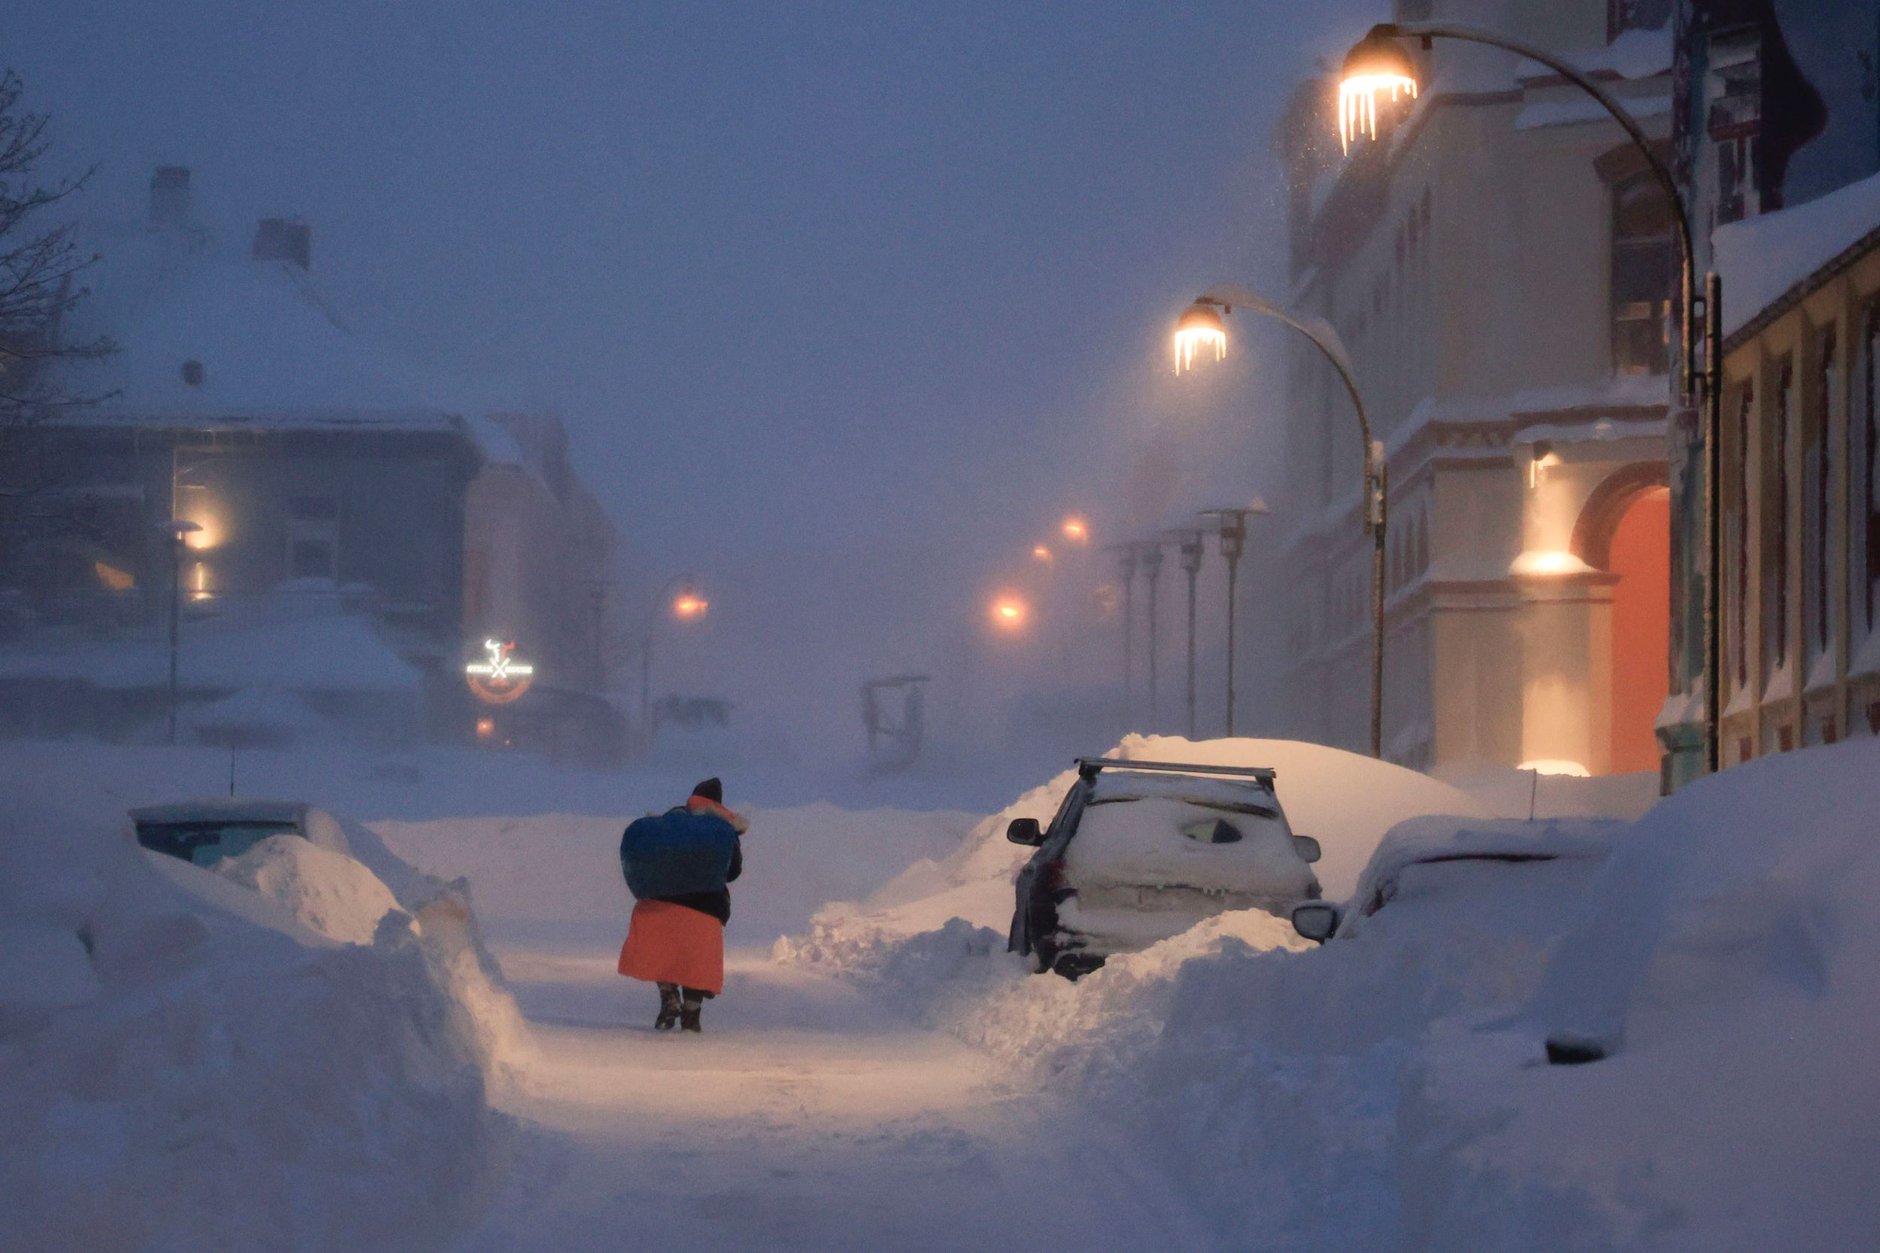 Heavy snow coats Scandinavia in chaos | Courthouse News Service